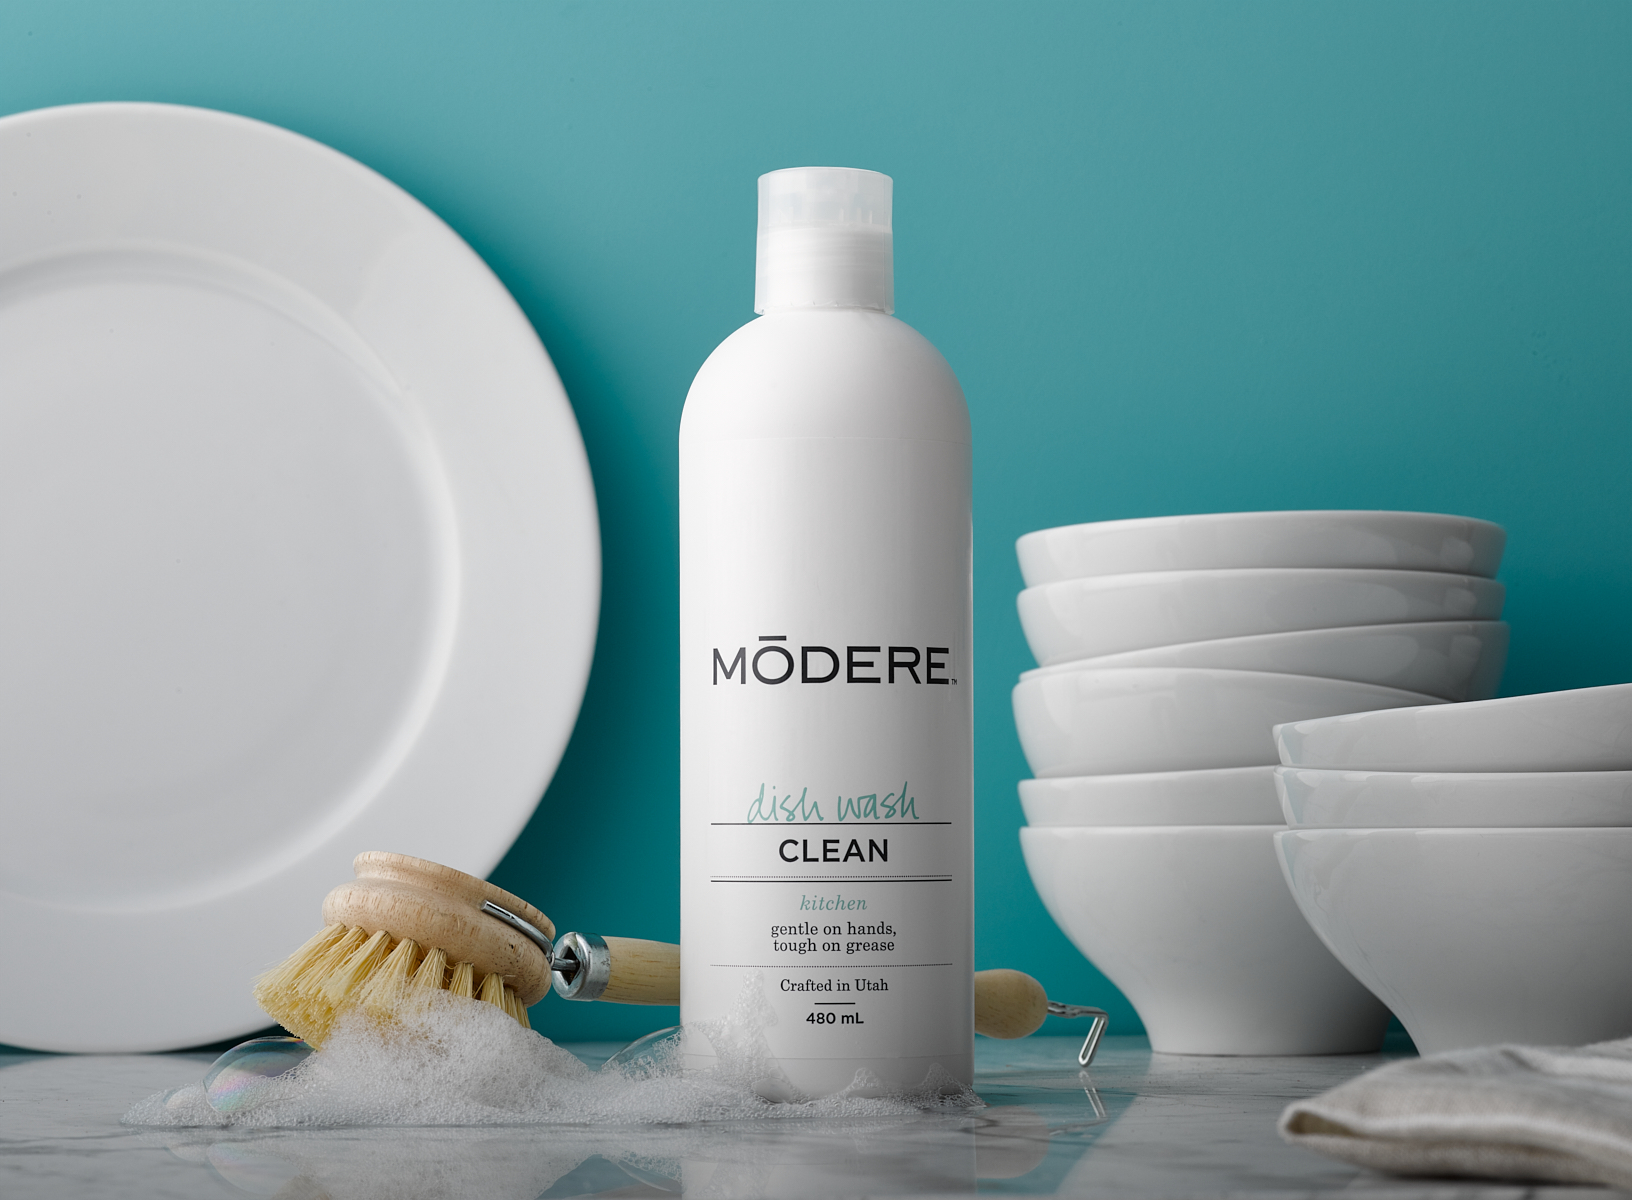 Modere dishwashing  products with dishes and bowls stacked up 